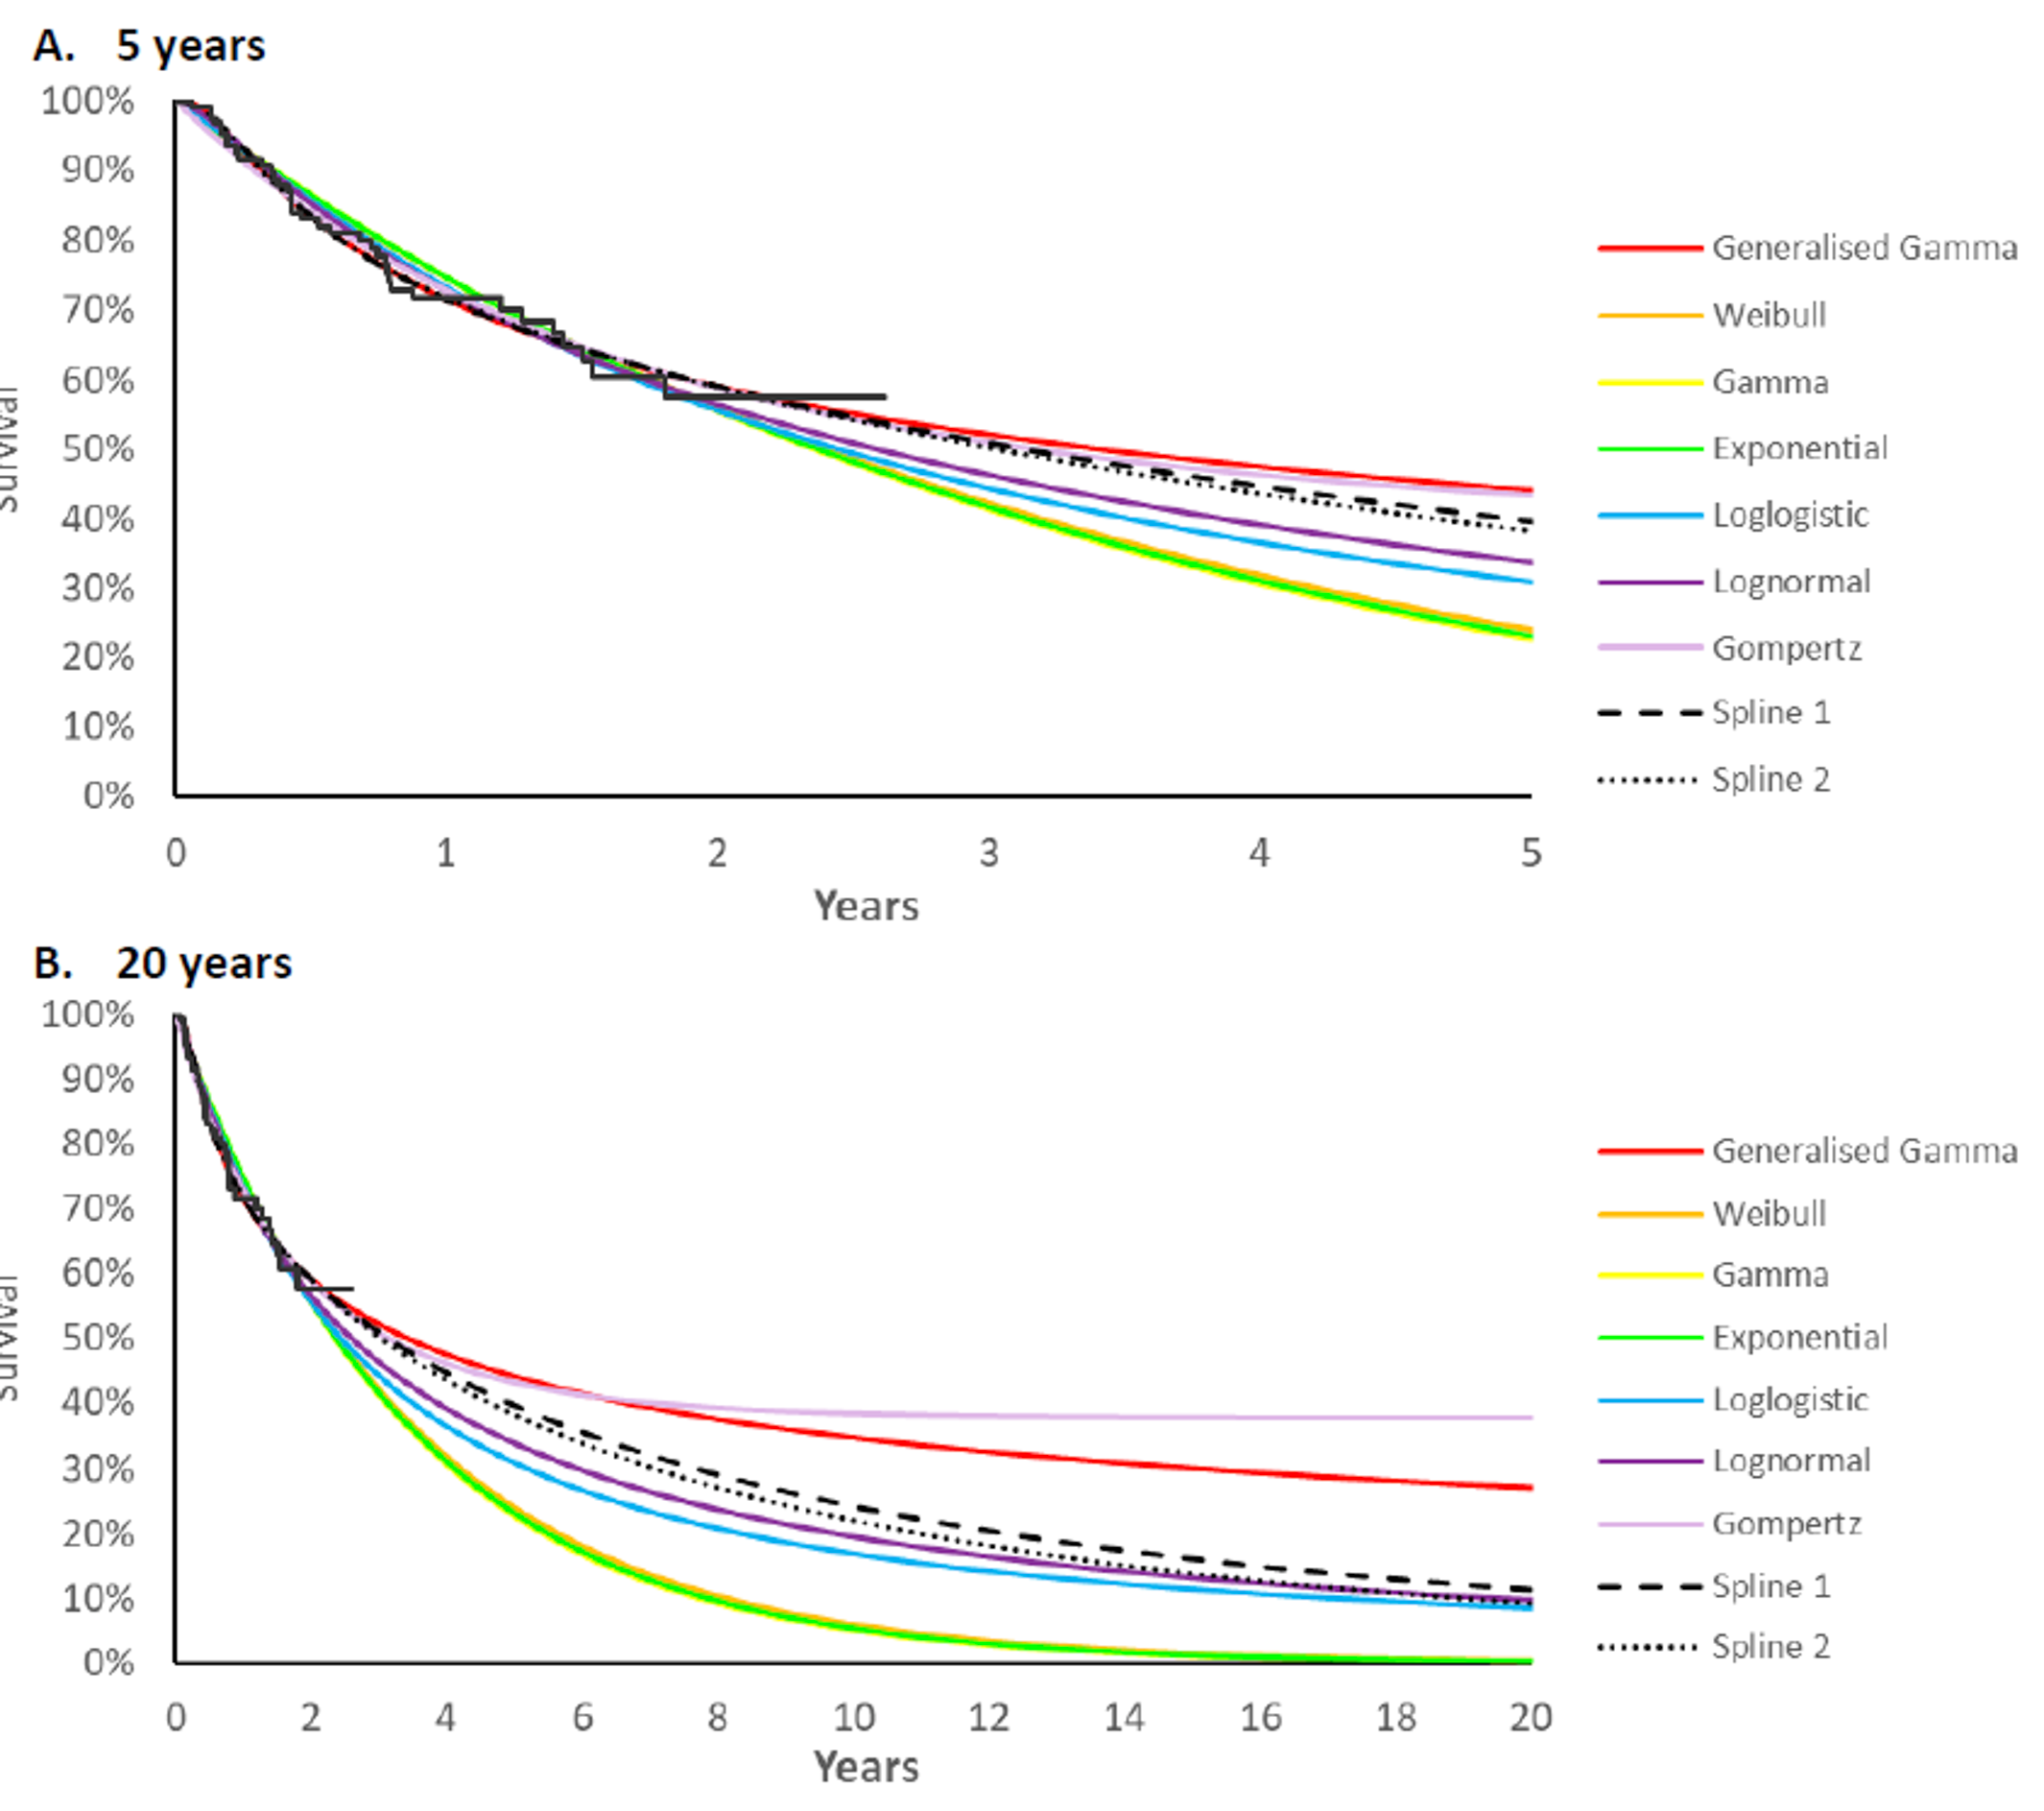 Two figures describing the observed and extrapolated overall survival estimates on a time scale of A) 5 years, and B) 20 years. Multiple curves are shown, with Gompertz representing the highest extrapolated survival (approximately 45% at 5 years) and Gamma representing the lowest extrapolated survival (approximately 22% at 5 years).